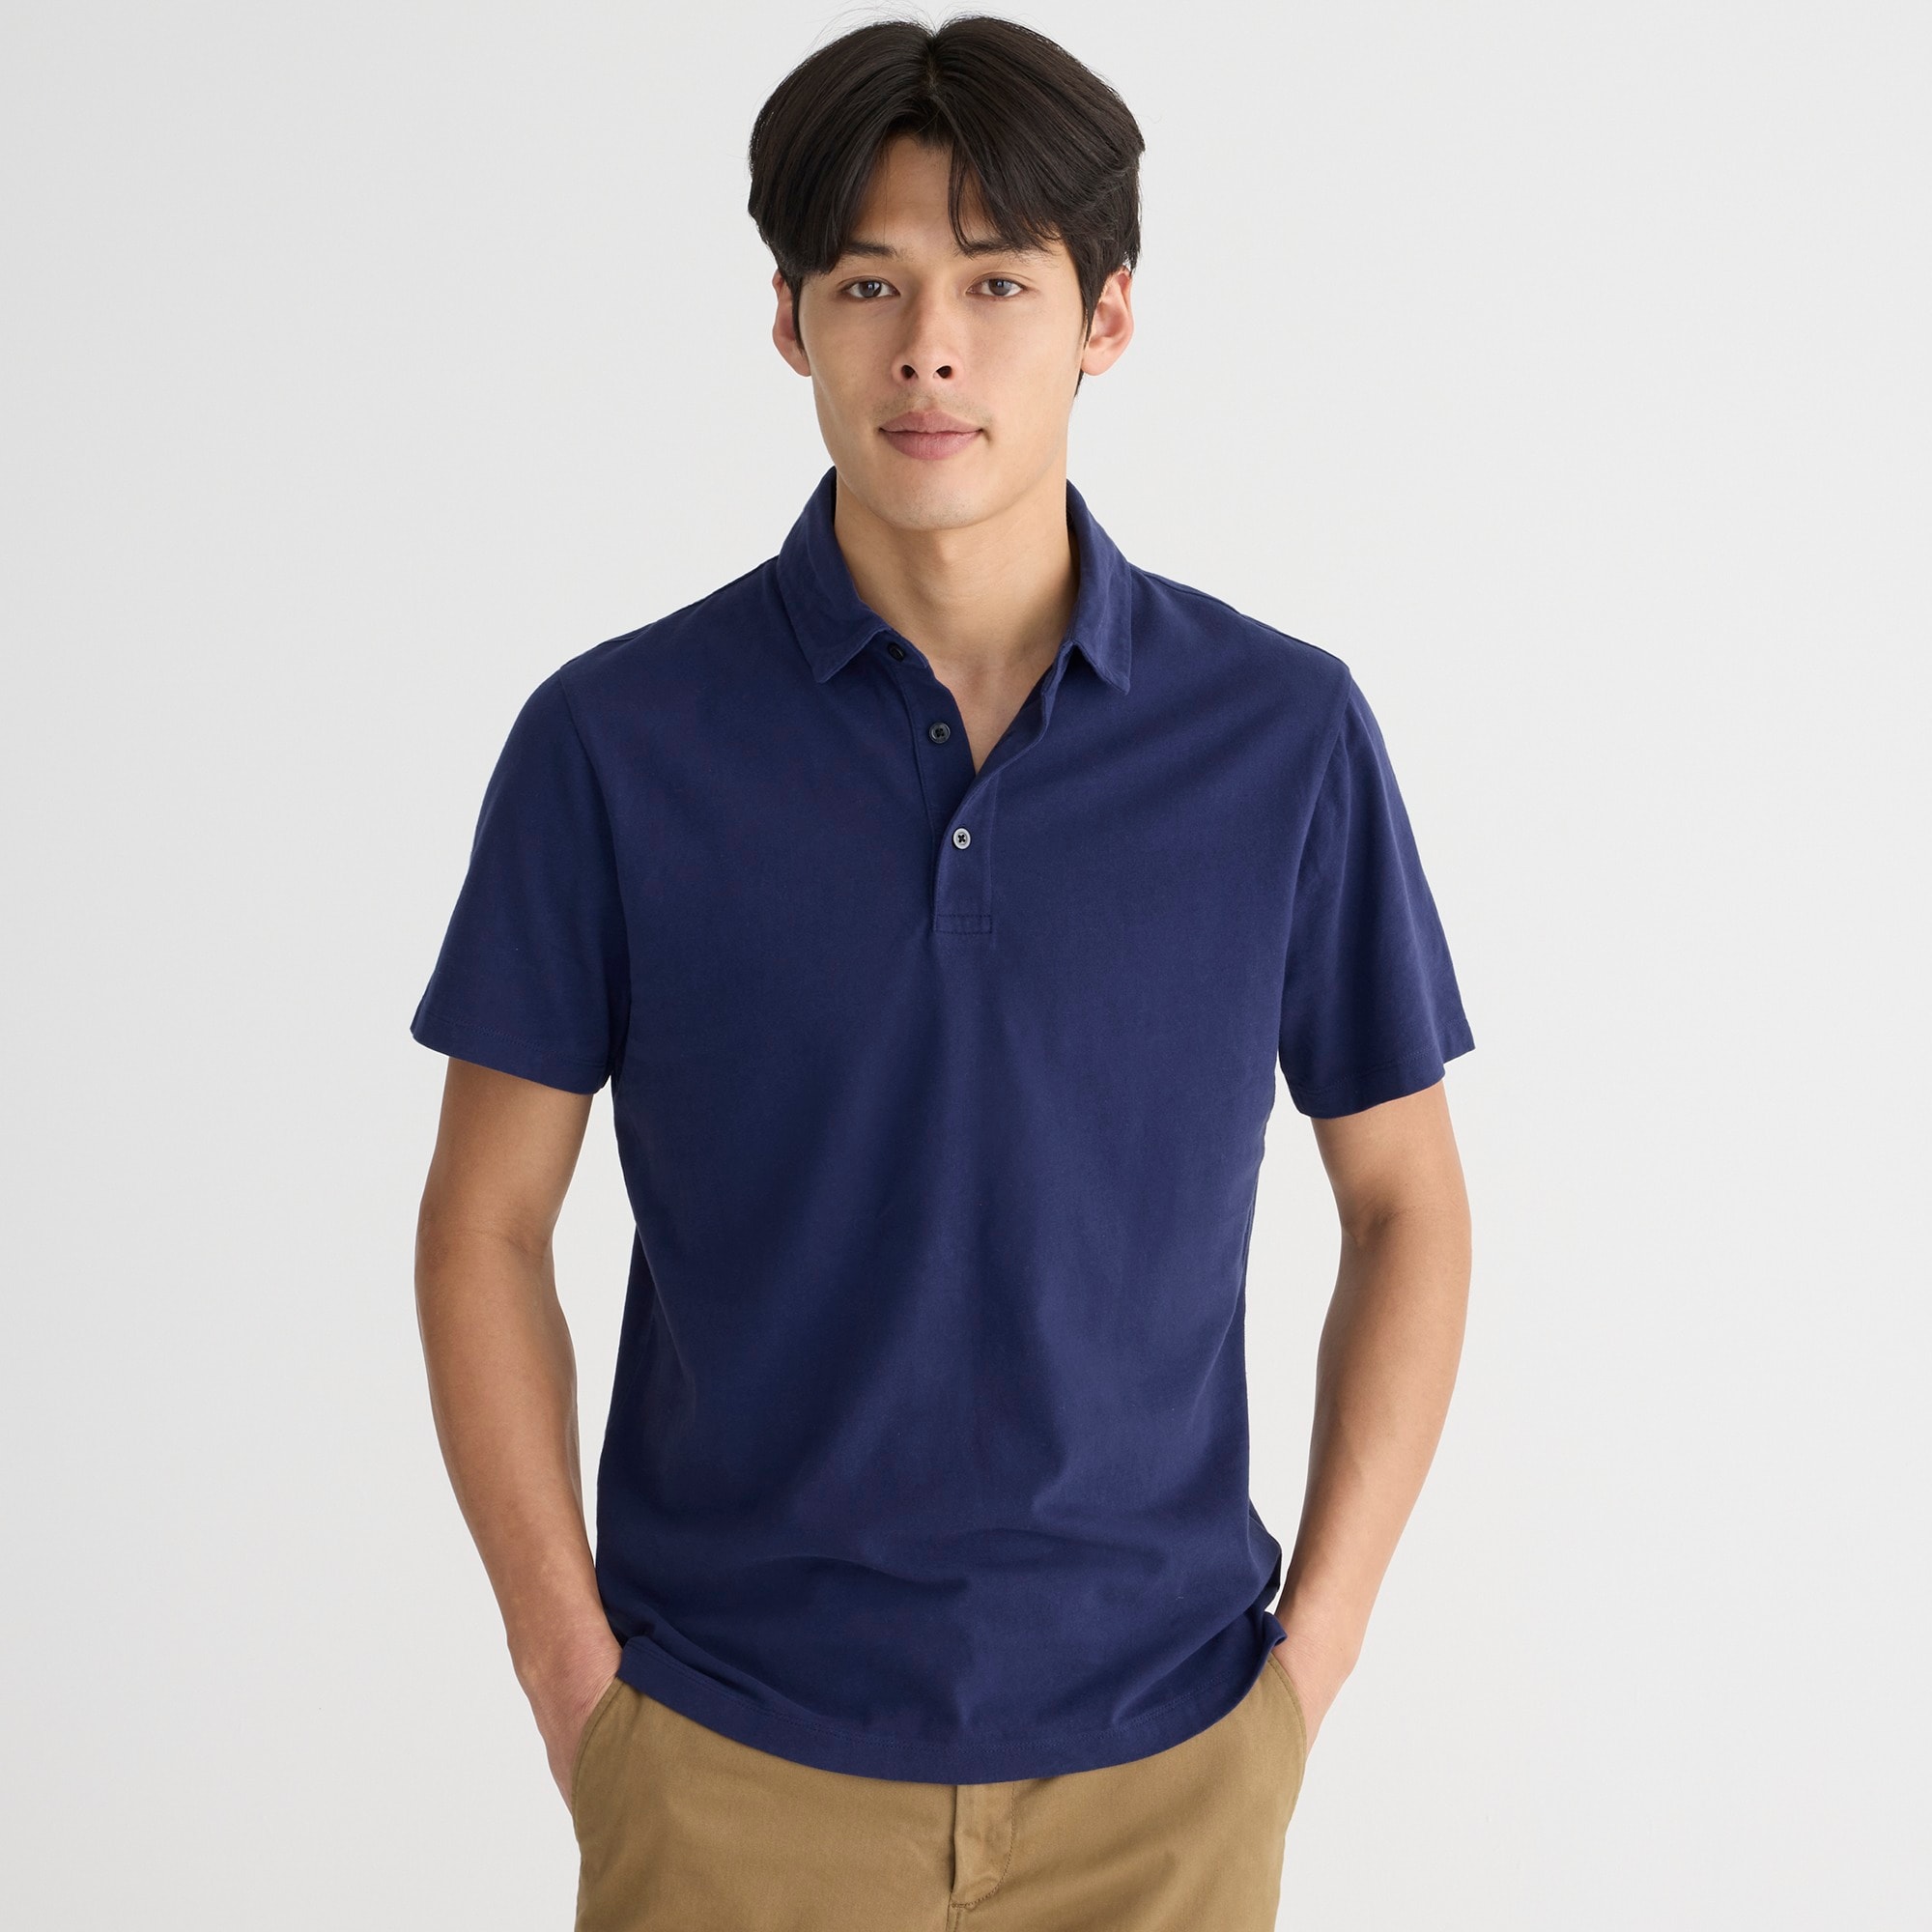 mens Tall sueded cotton polo shirt